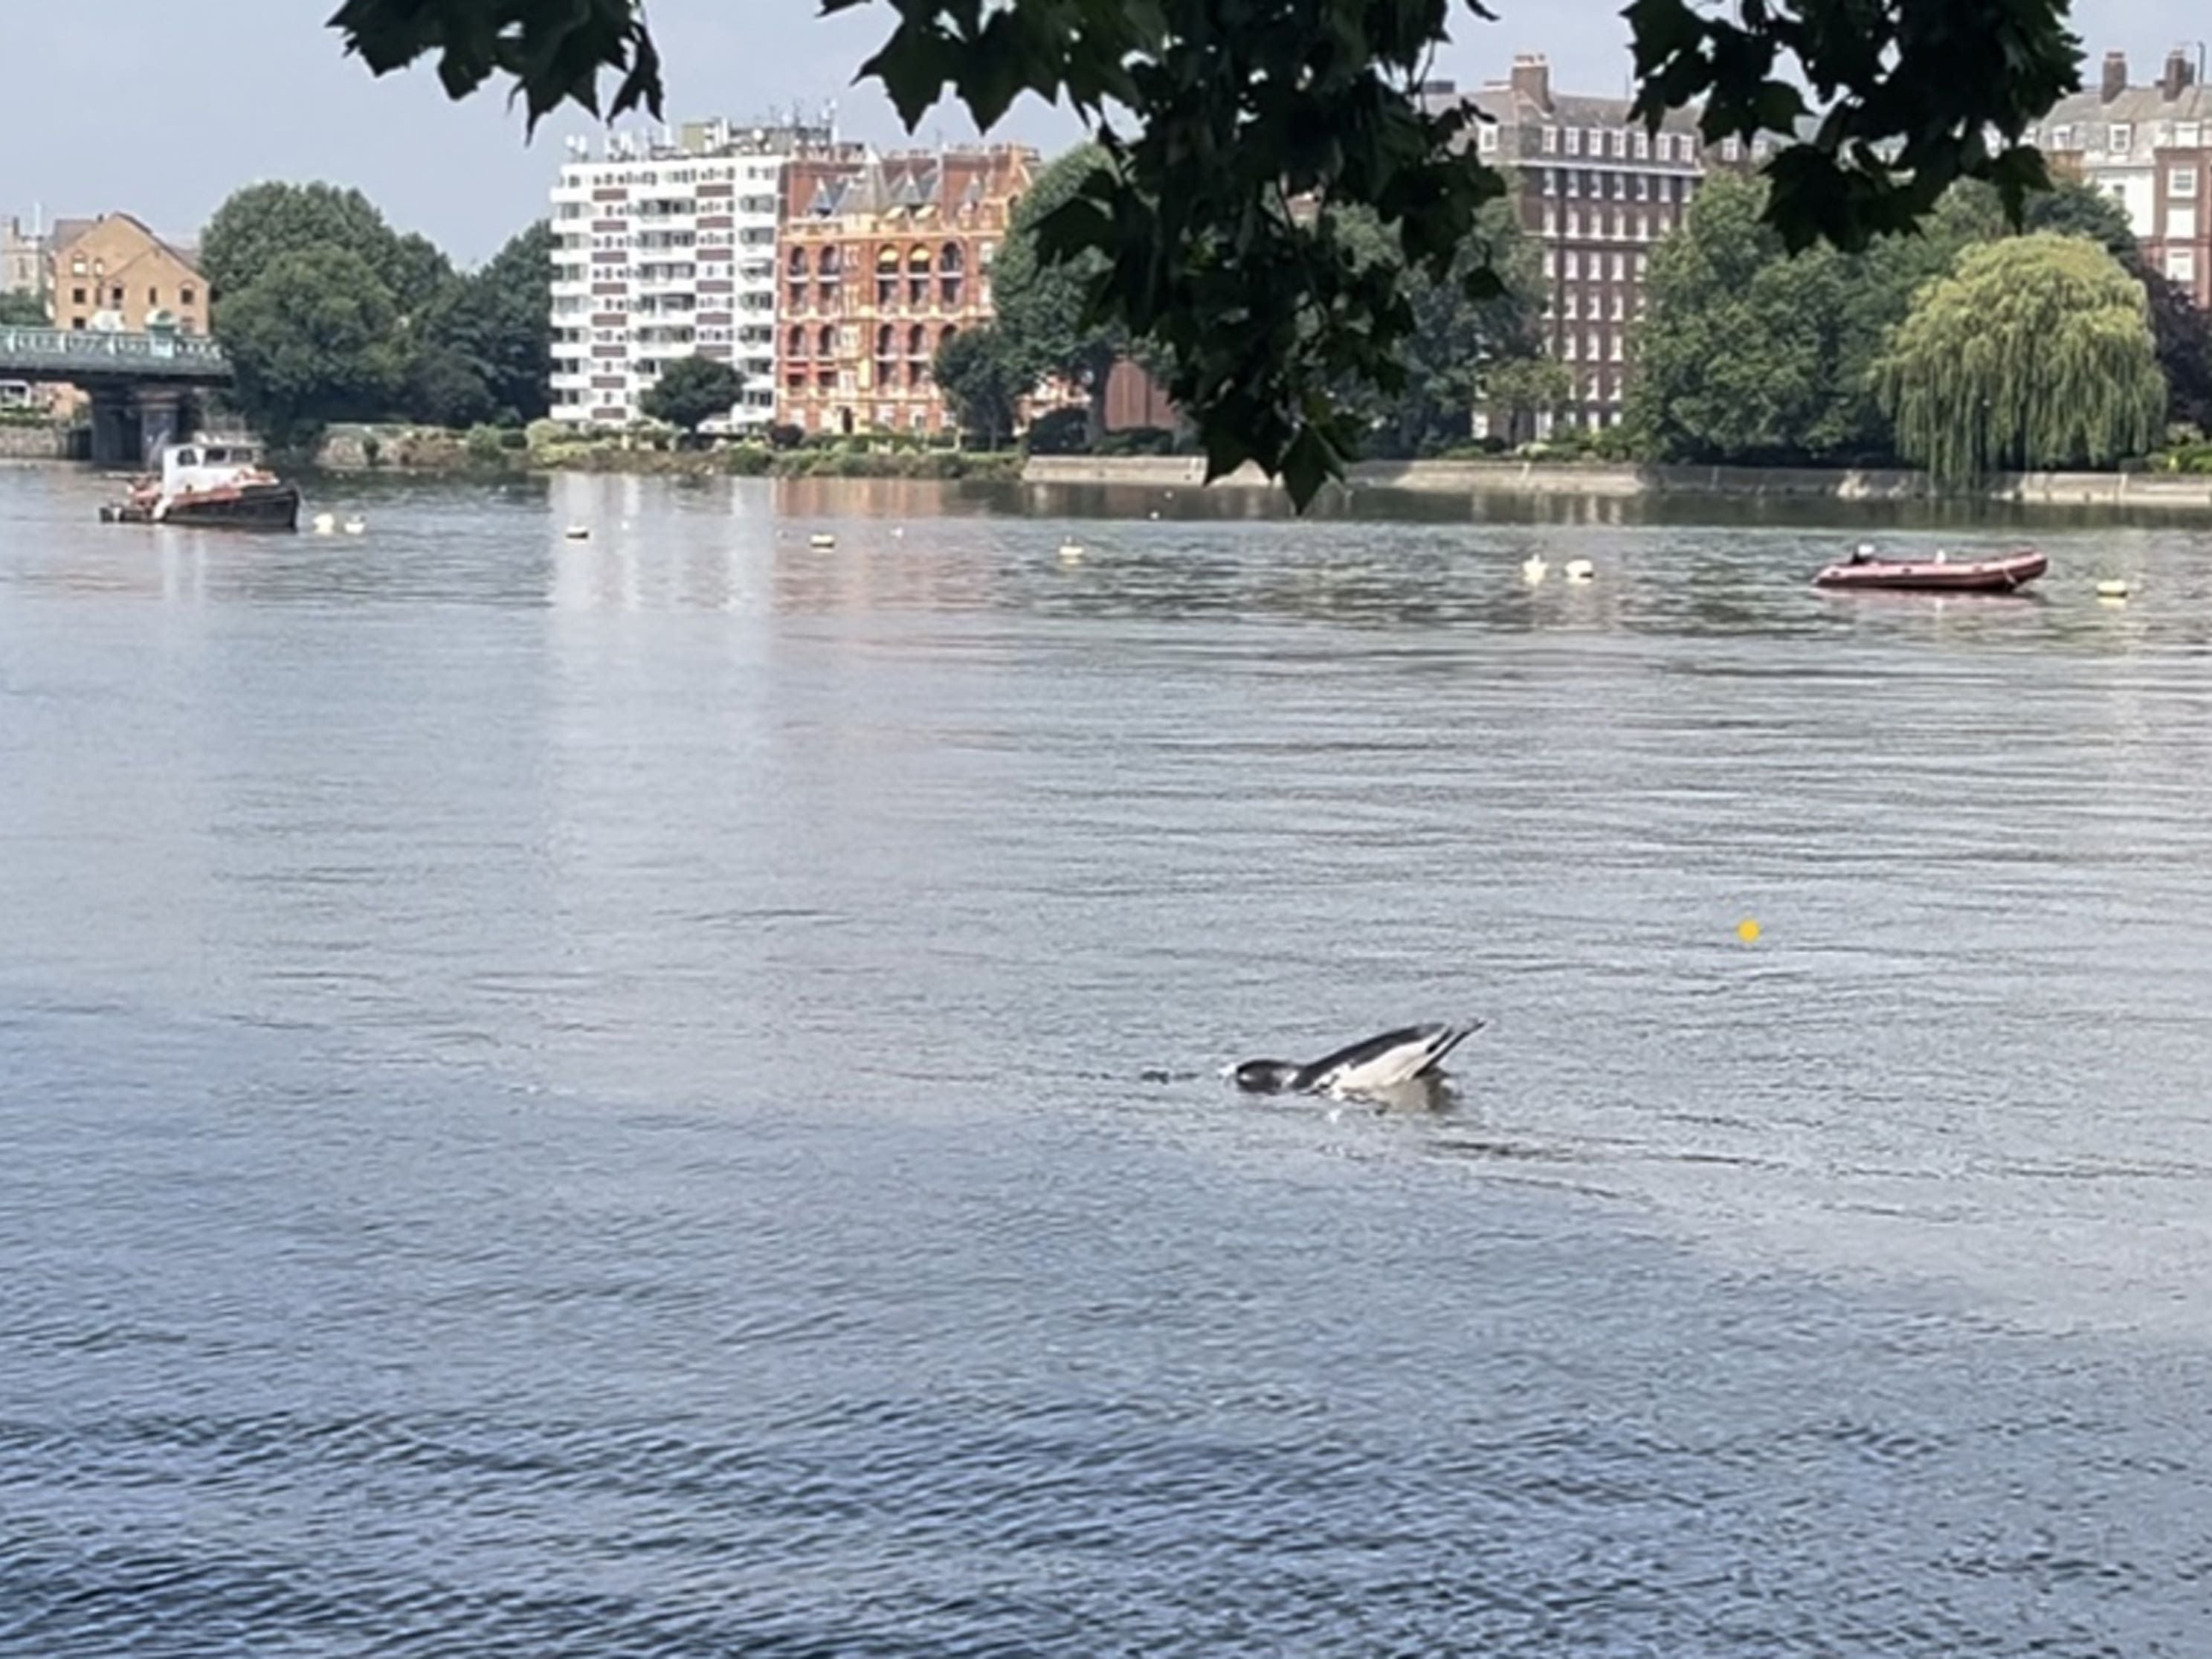 Two dolphins ‘found dead on banks of River Thames in London’